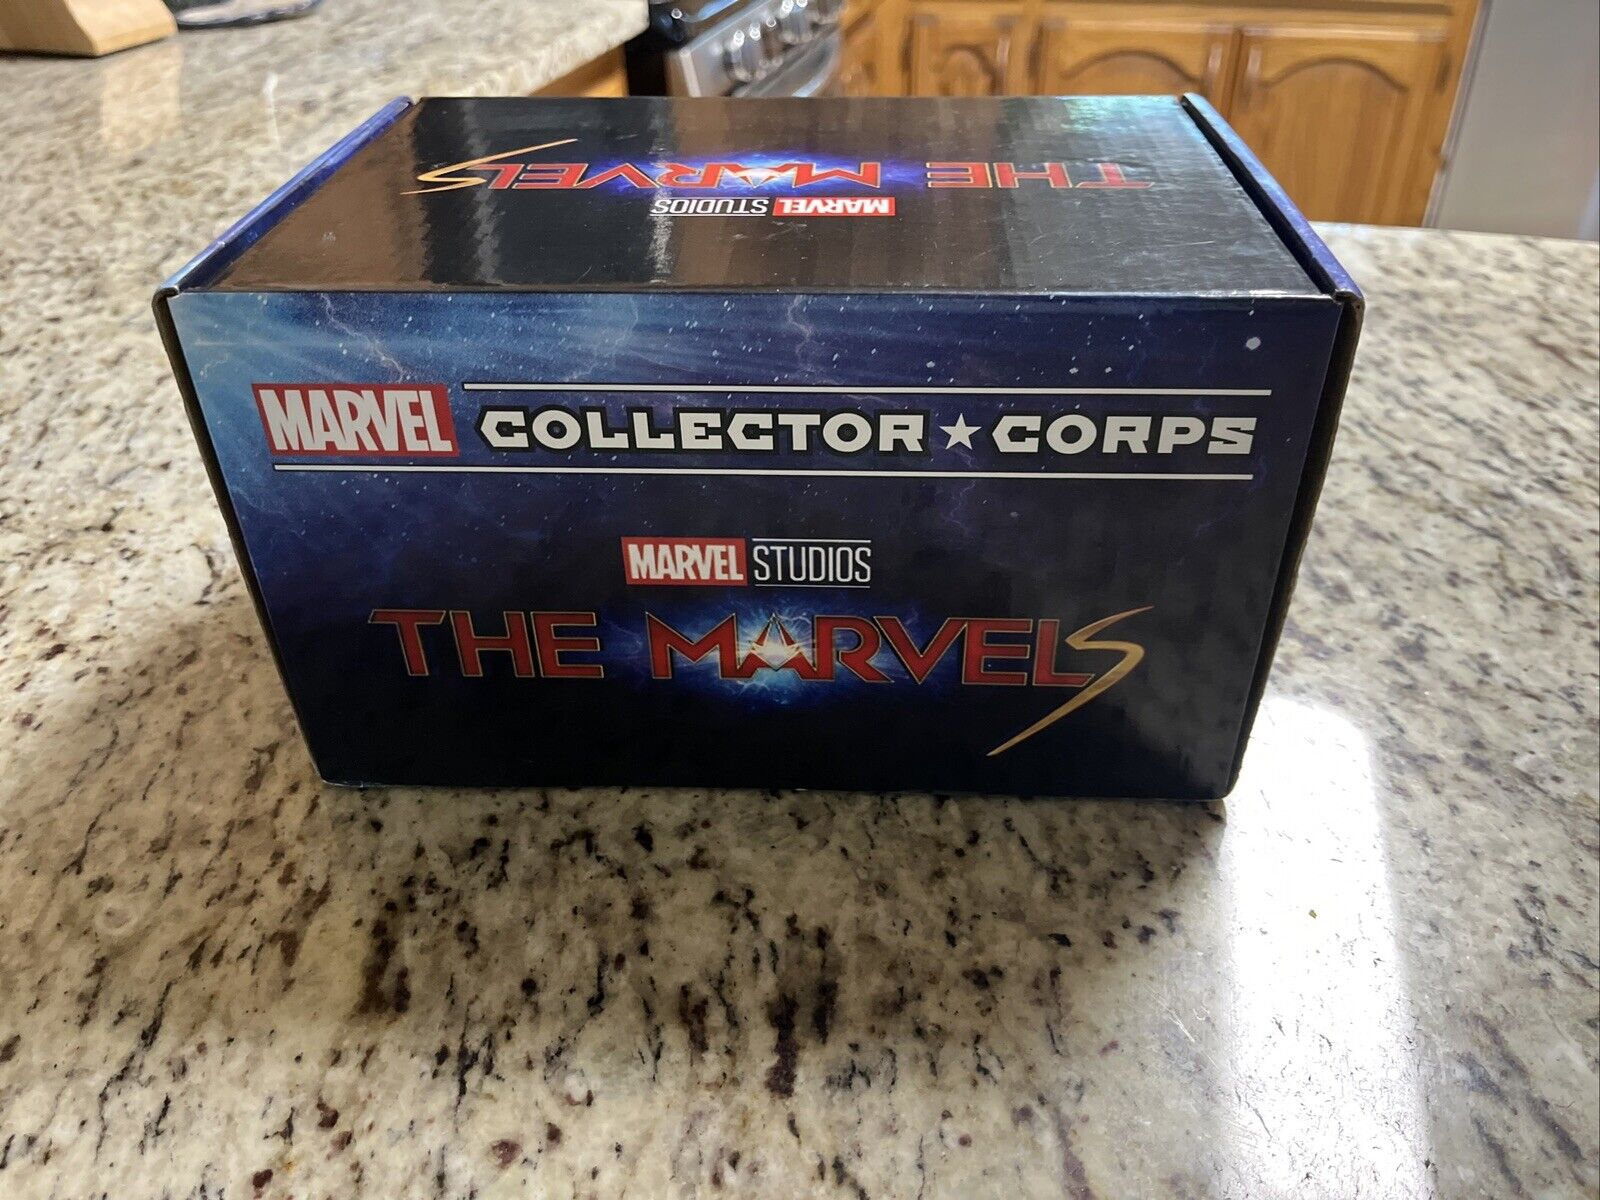 Marvel Collector Corps Box - The Marvels Funko POP Shirt Size 2xl